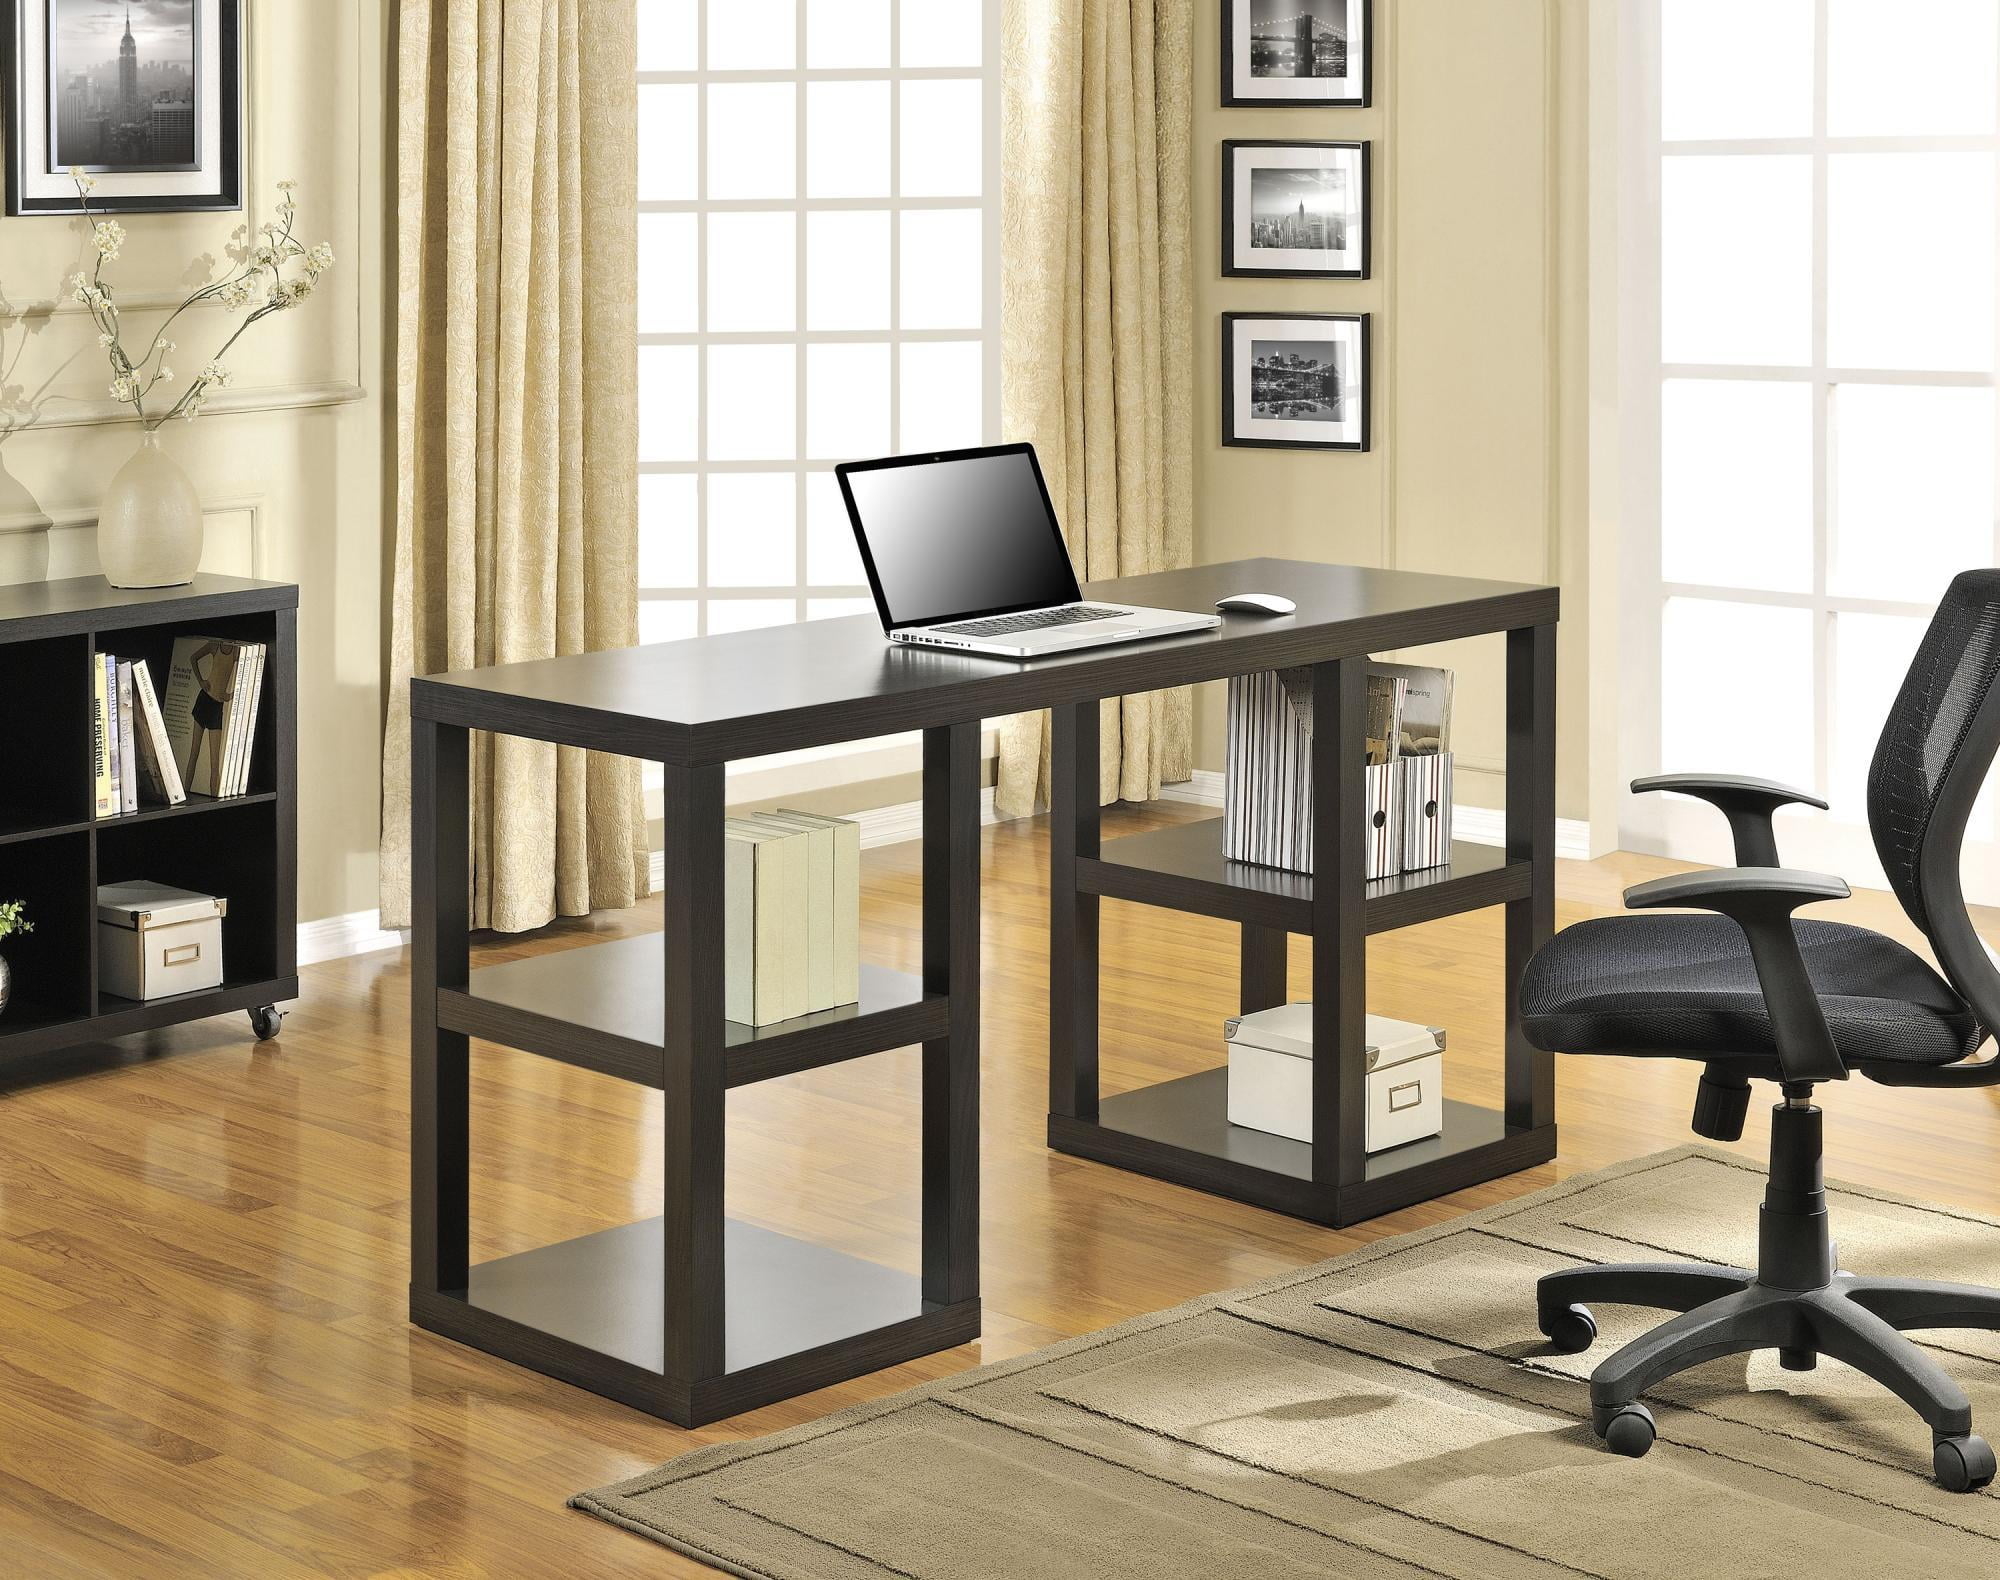 Espresso with Student Chair Mainstays Basic Student Desk.Model 9120596W 